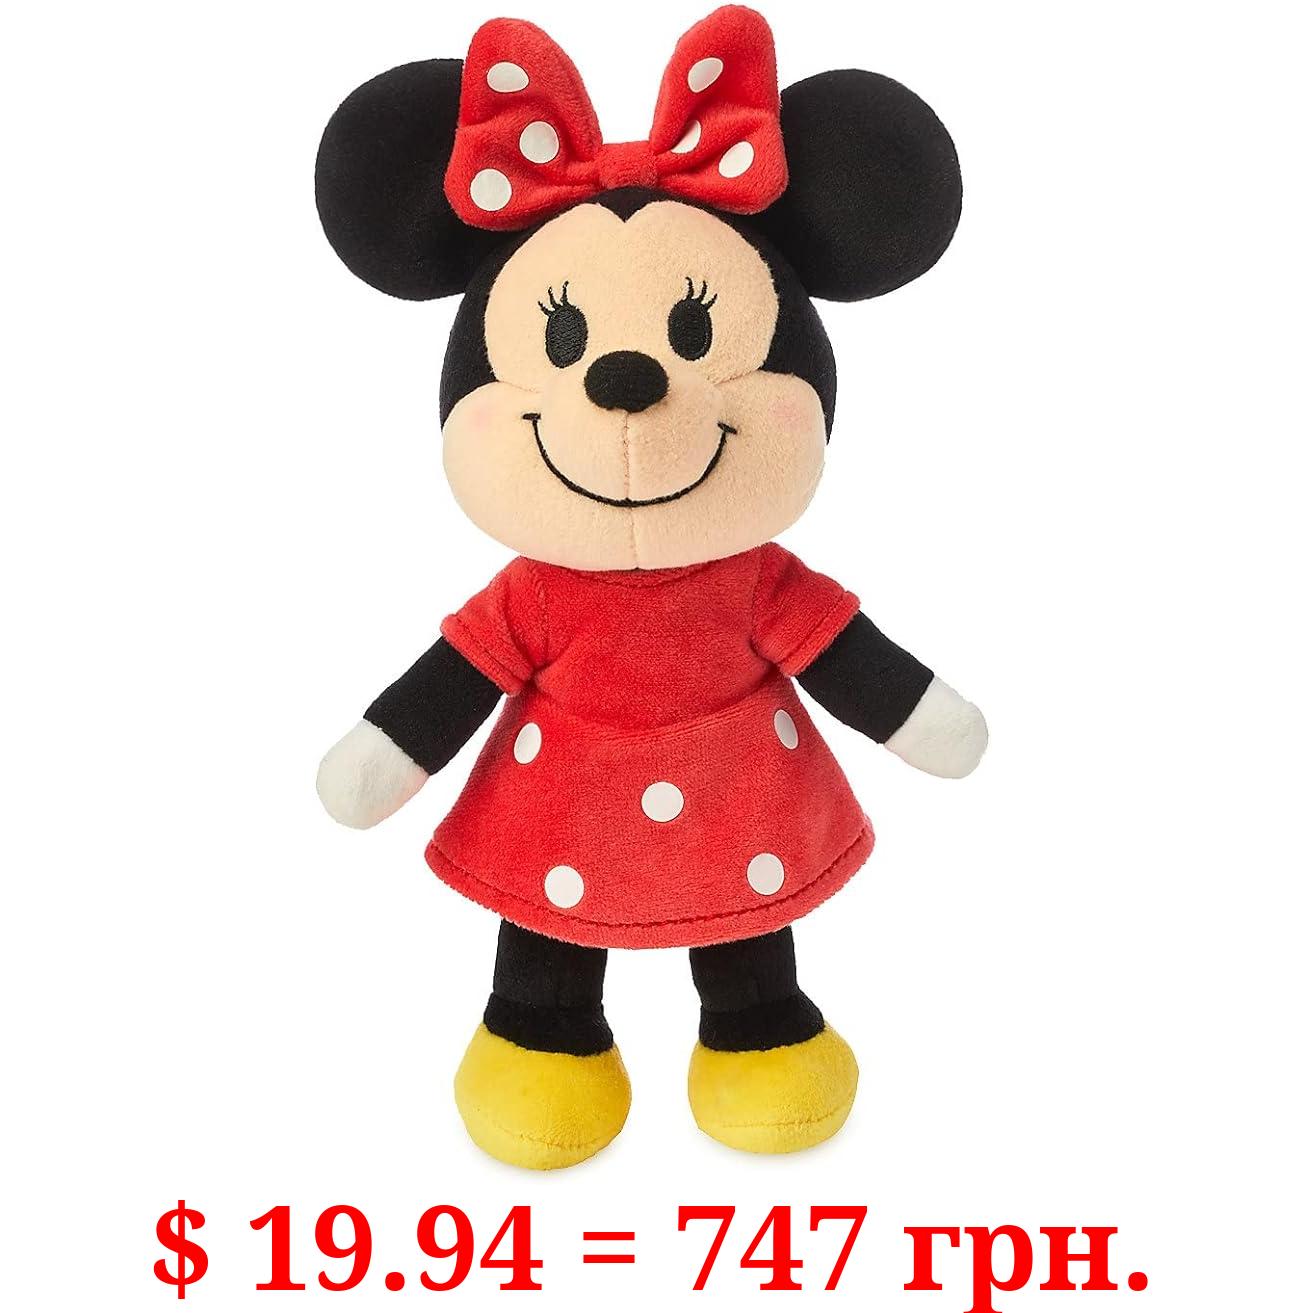 Disney Minnie Mouse nuiMOs Plush | 6" Cuddly Baby Stuffed Toy | Ages 0+ | Gift for Kids